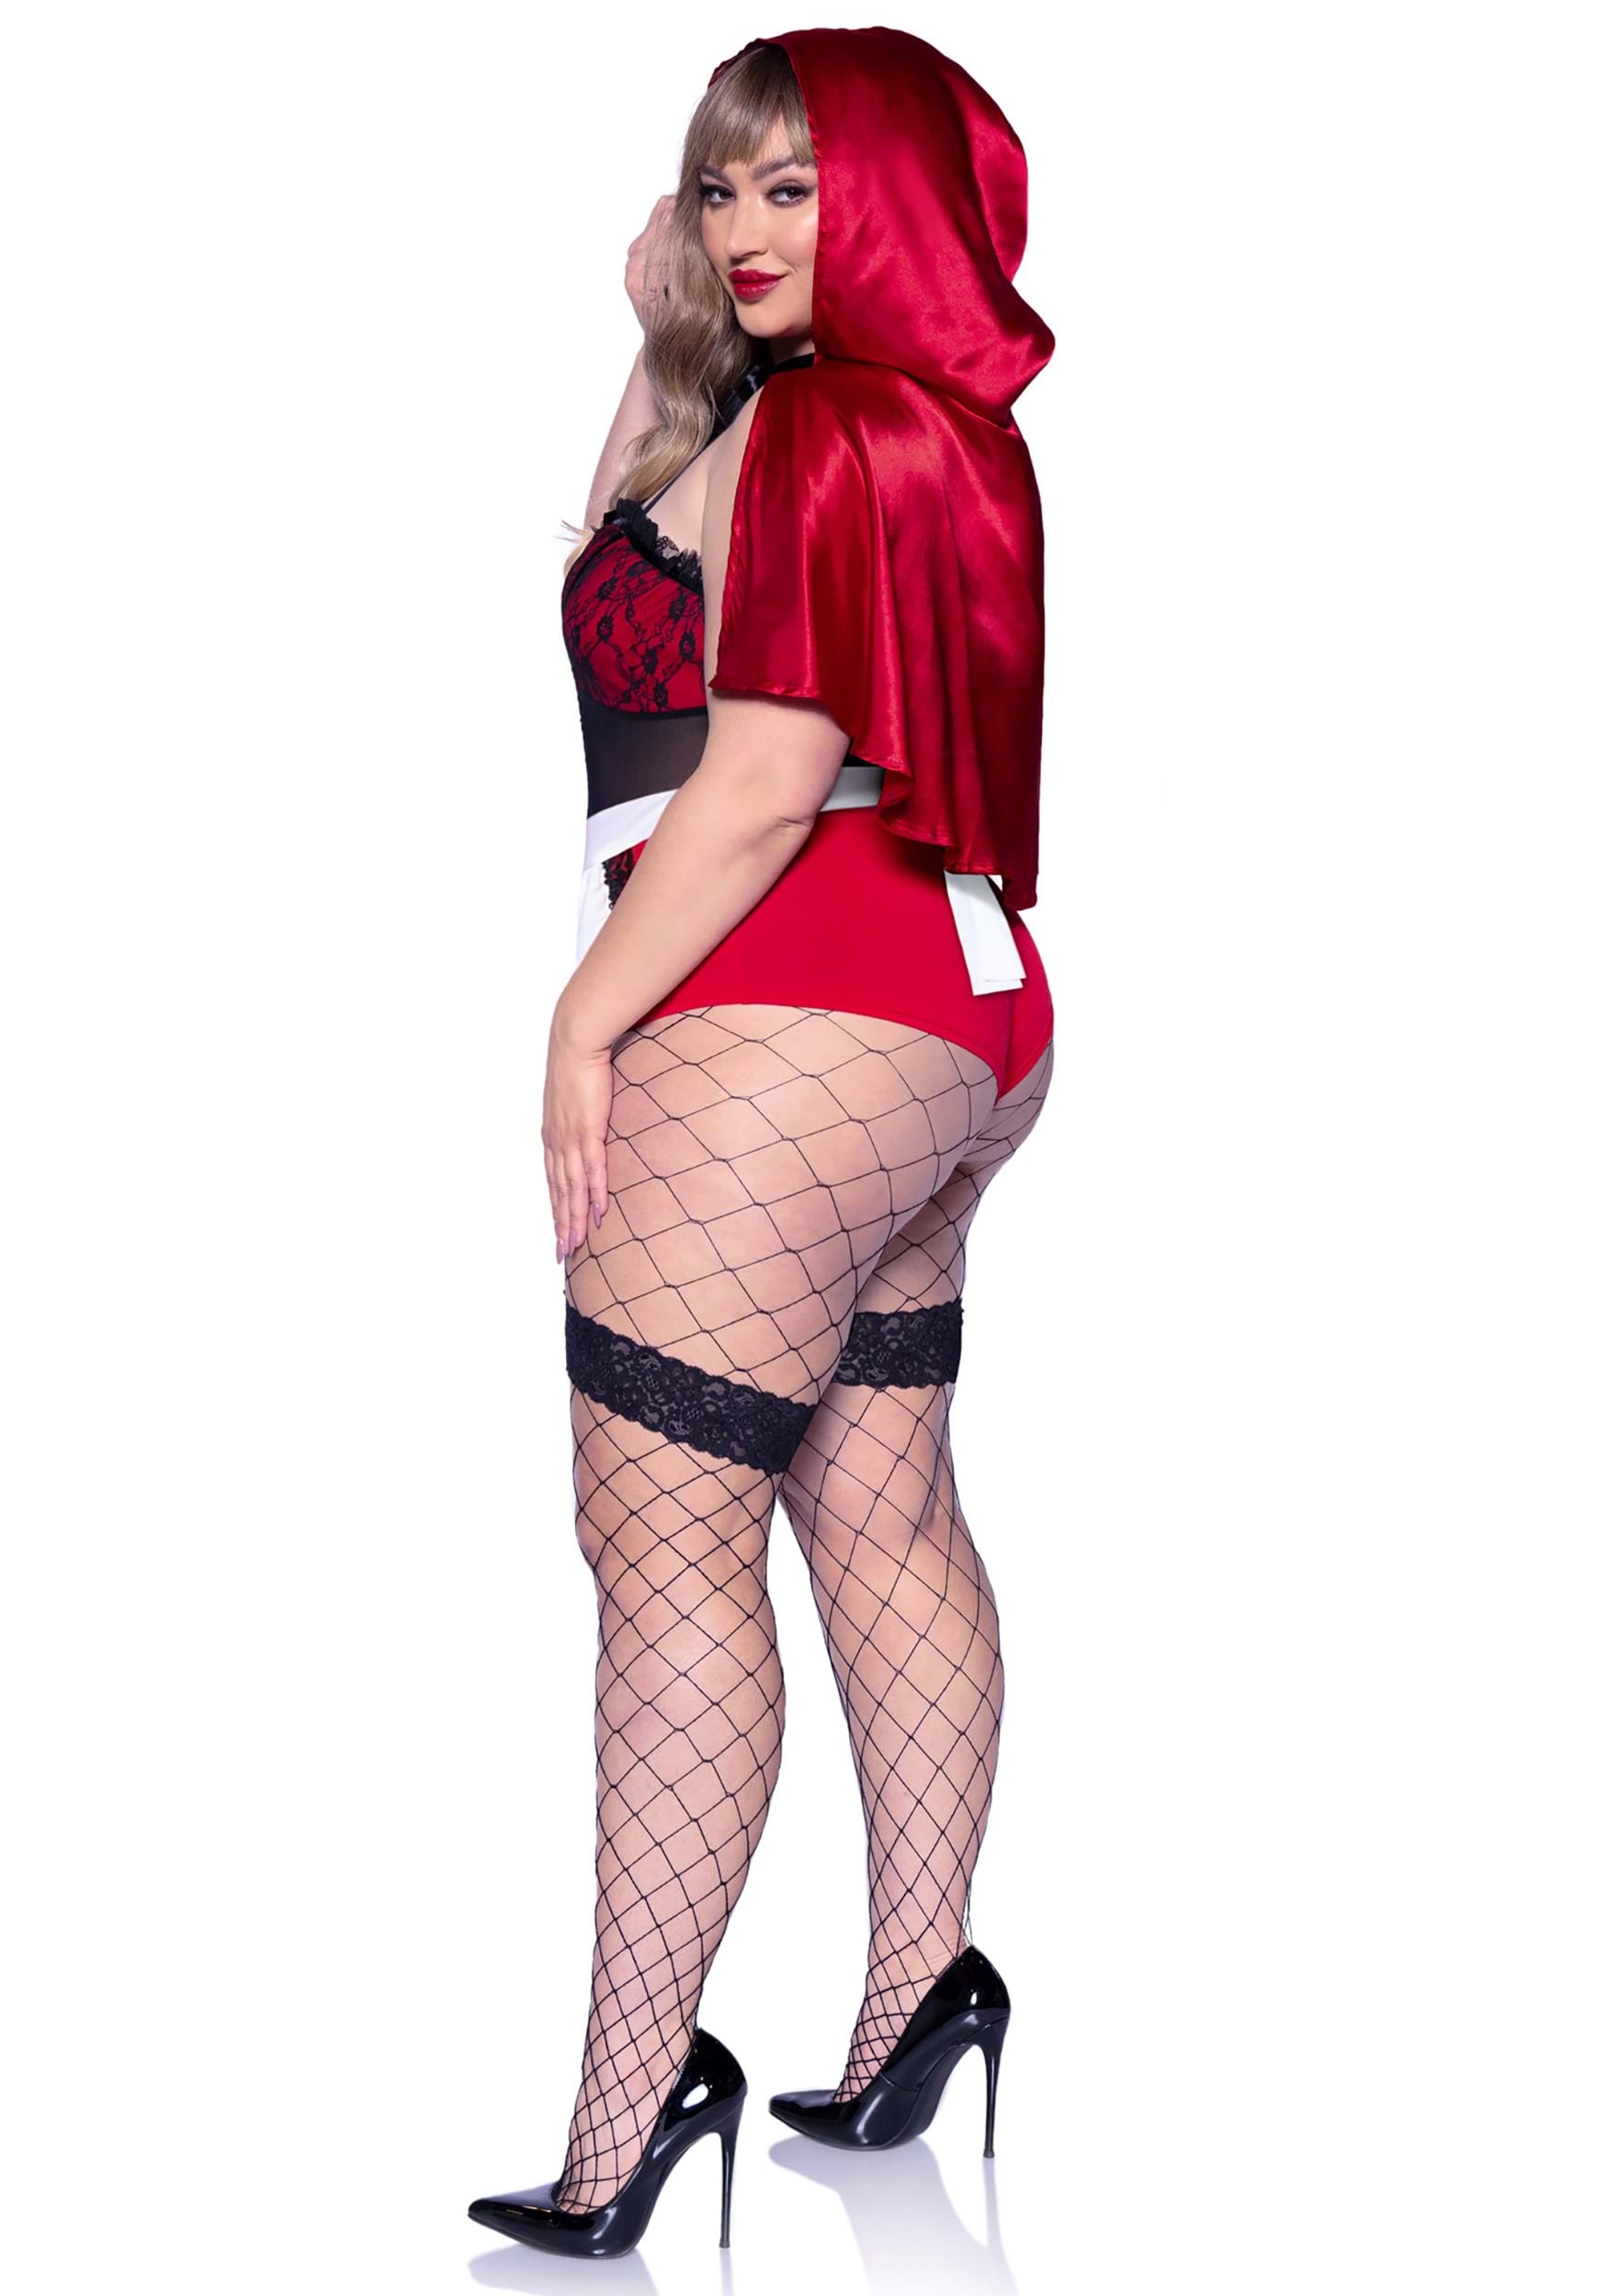 Plus Size Women's Naughty Miss Red Costume